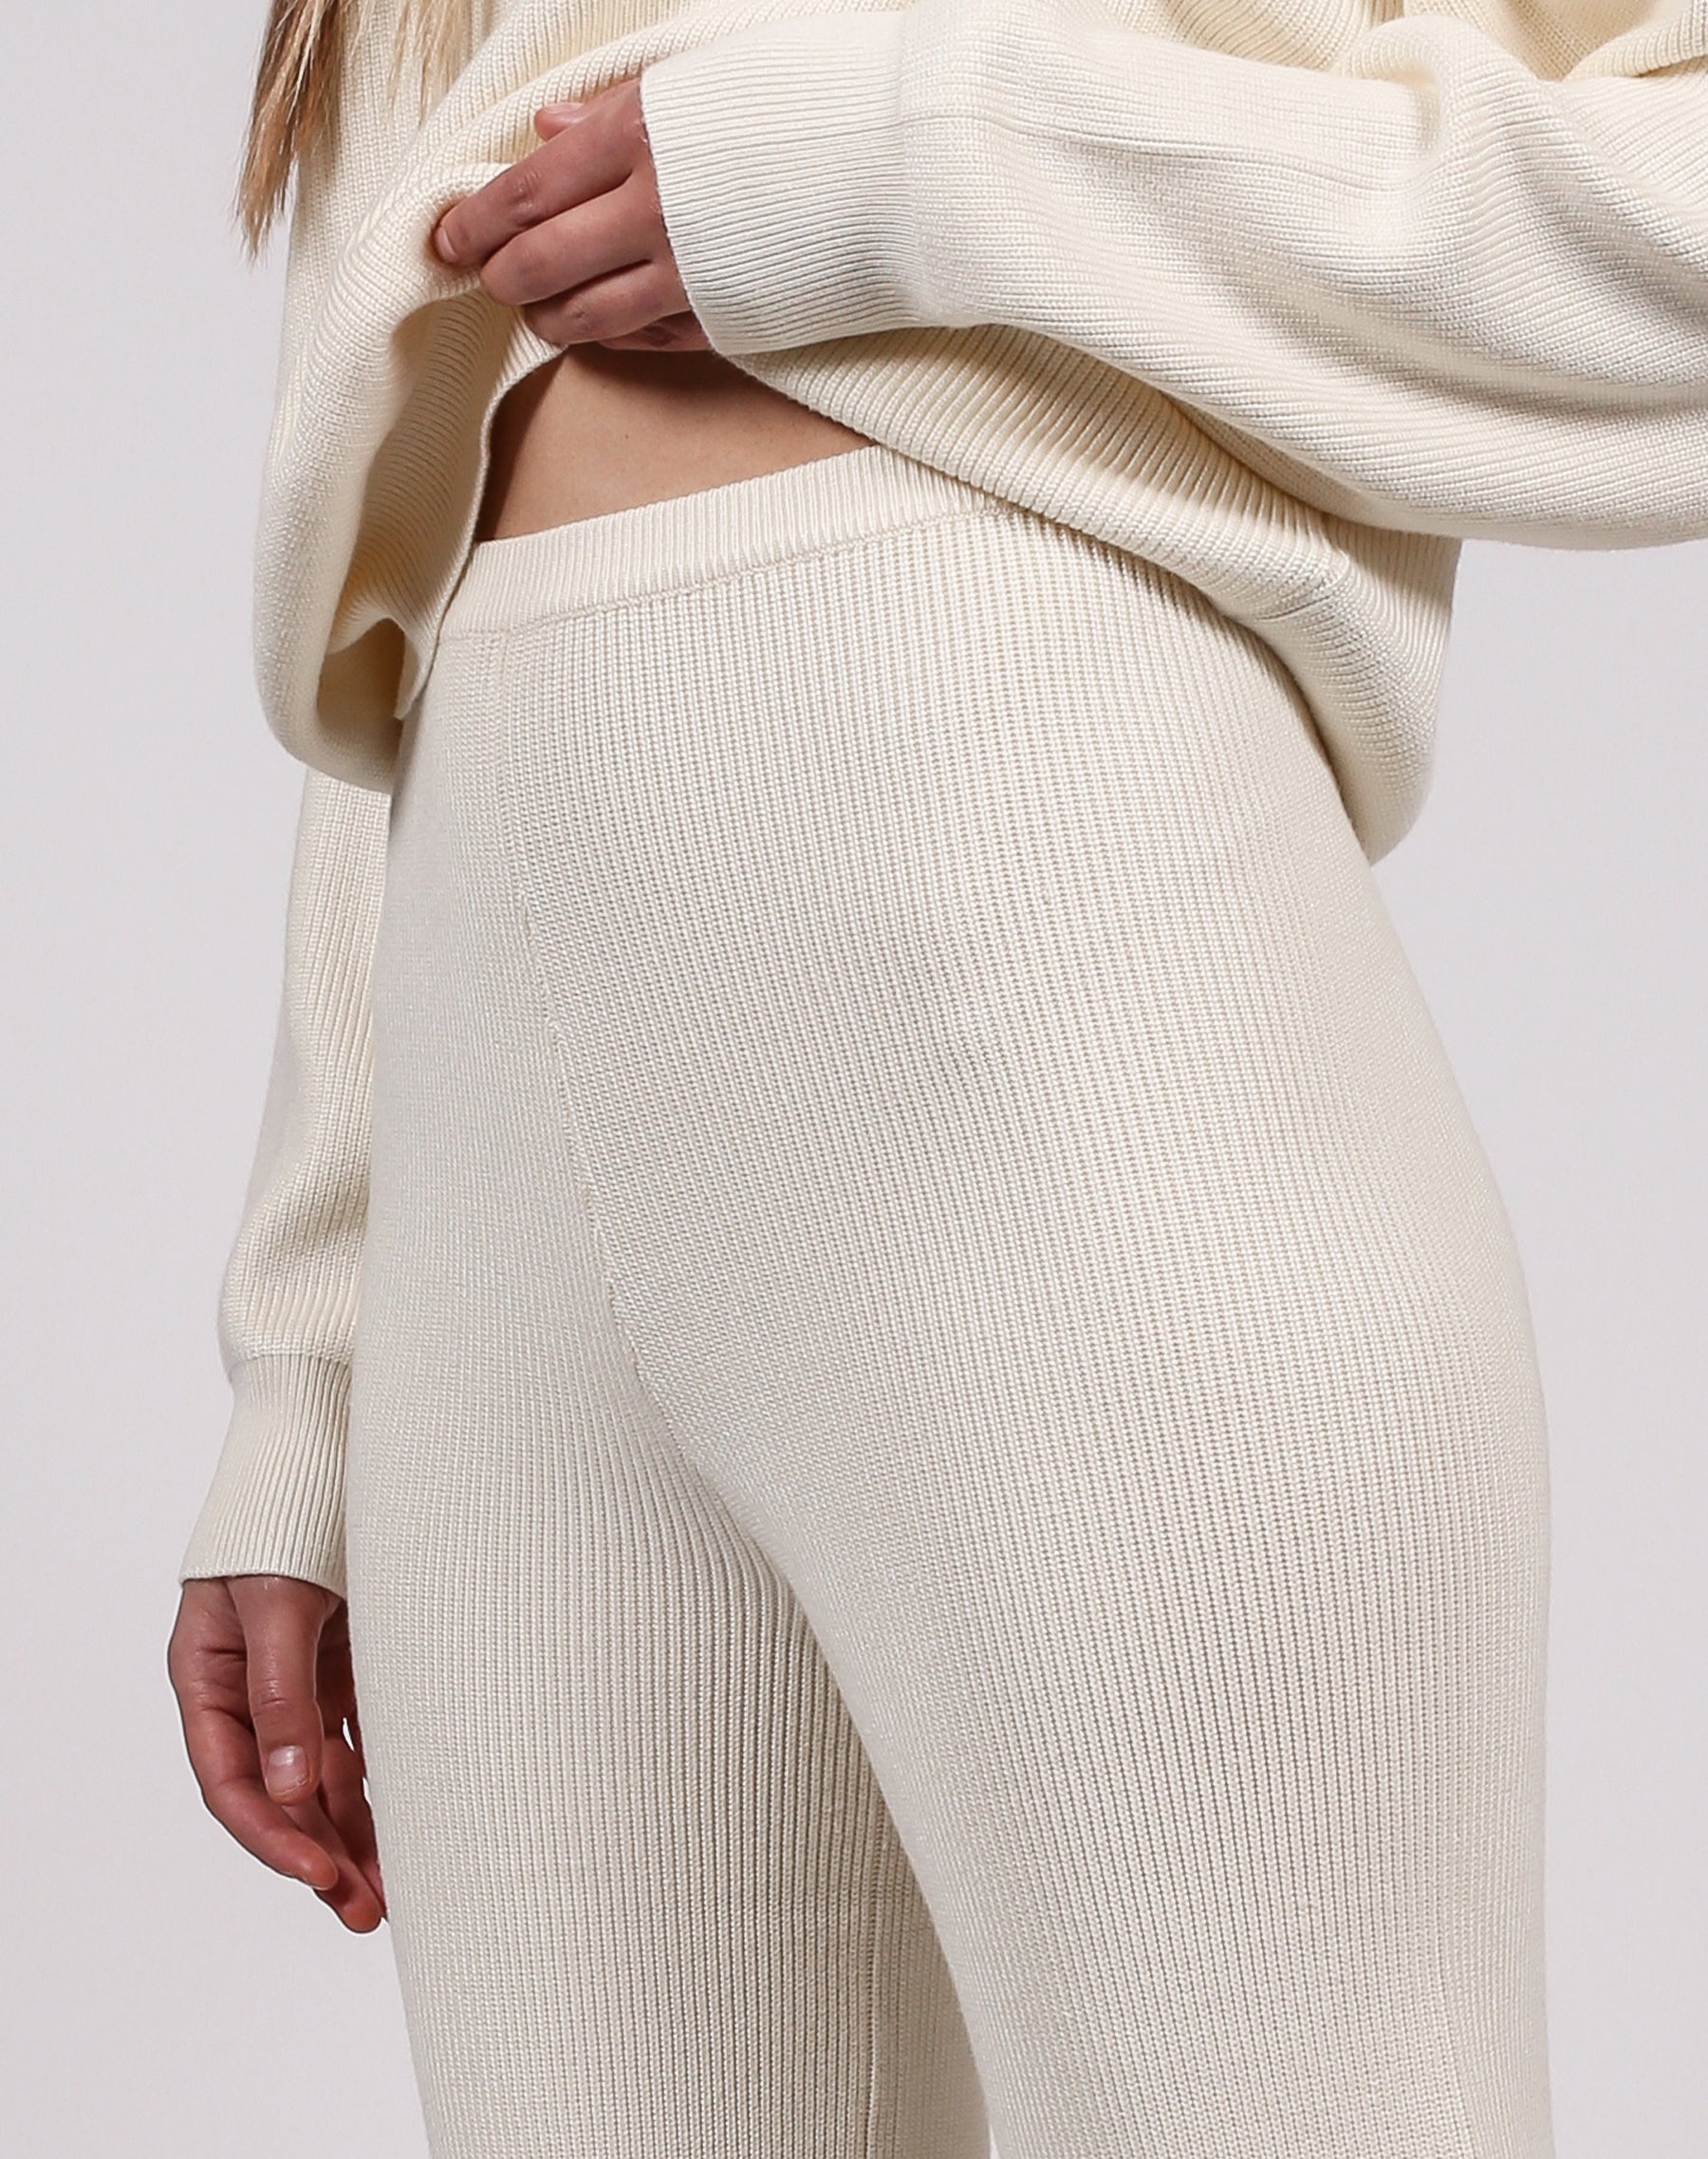 The Ribbed Knit Pant | Cream